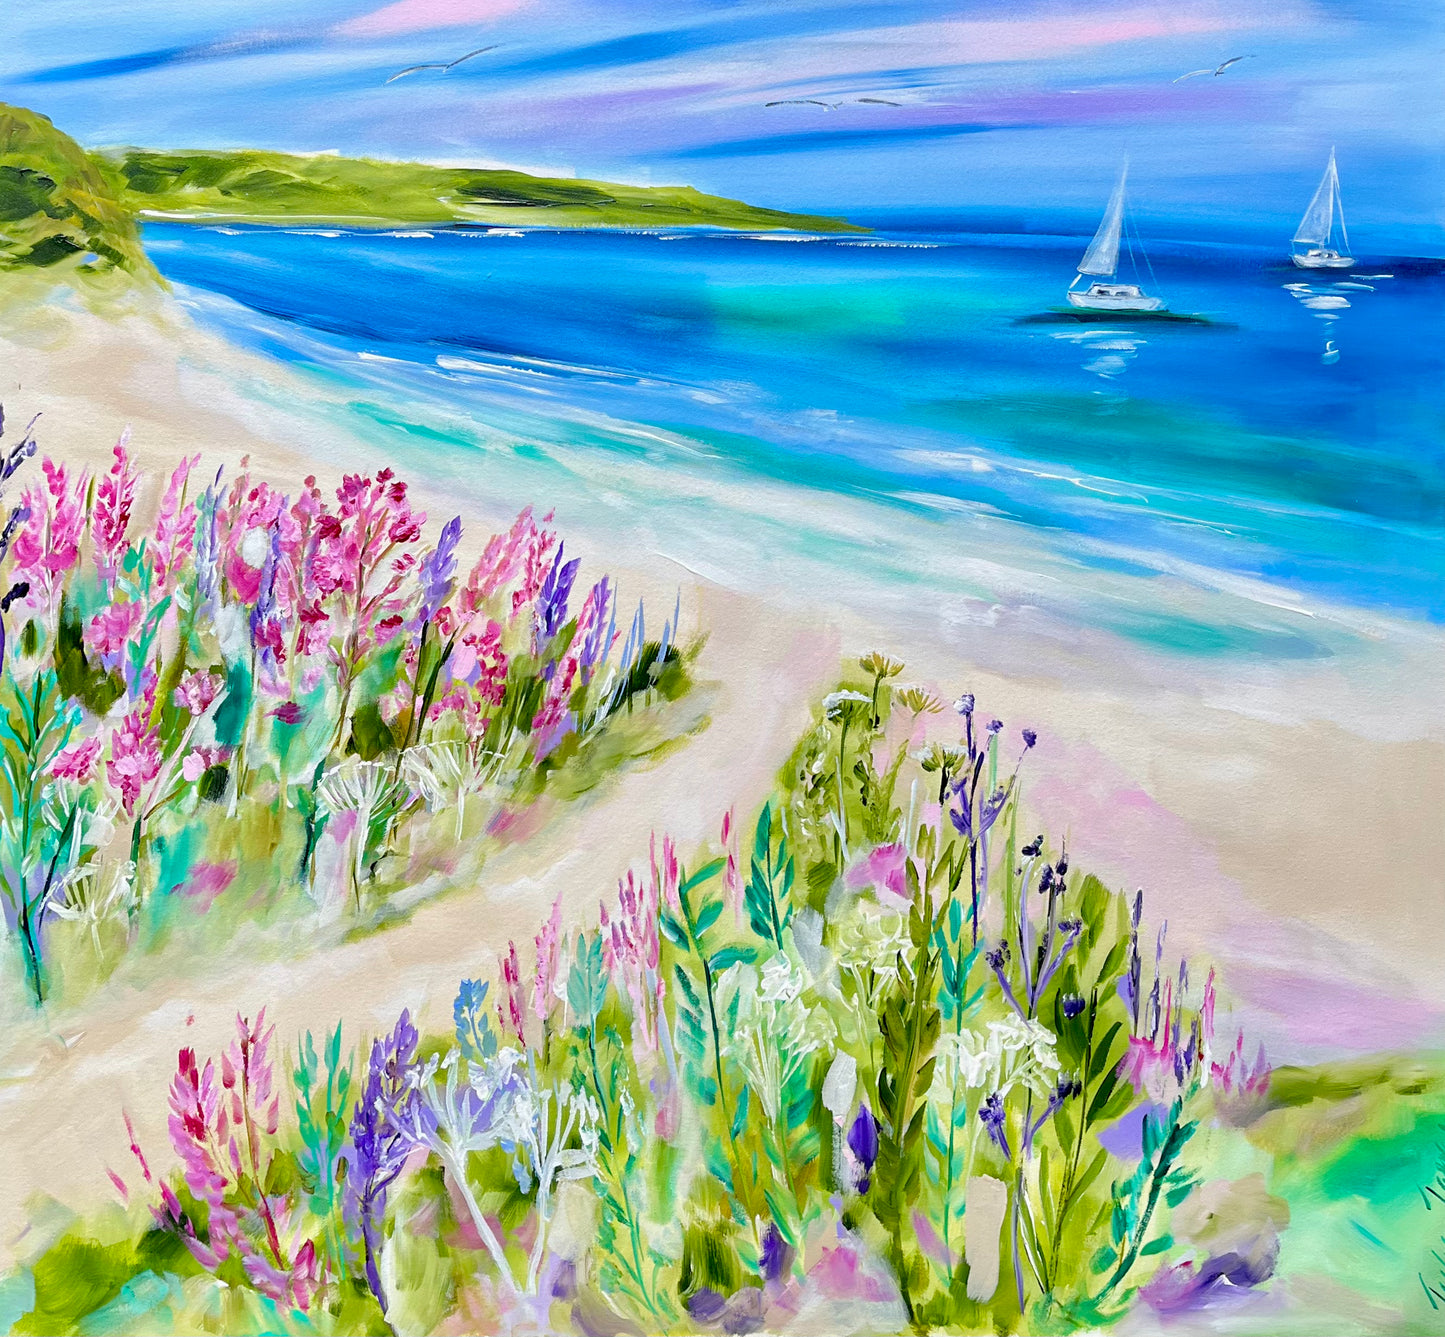 My Island Life -1.1x1m - Original Artwork - Available by Commission